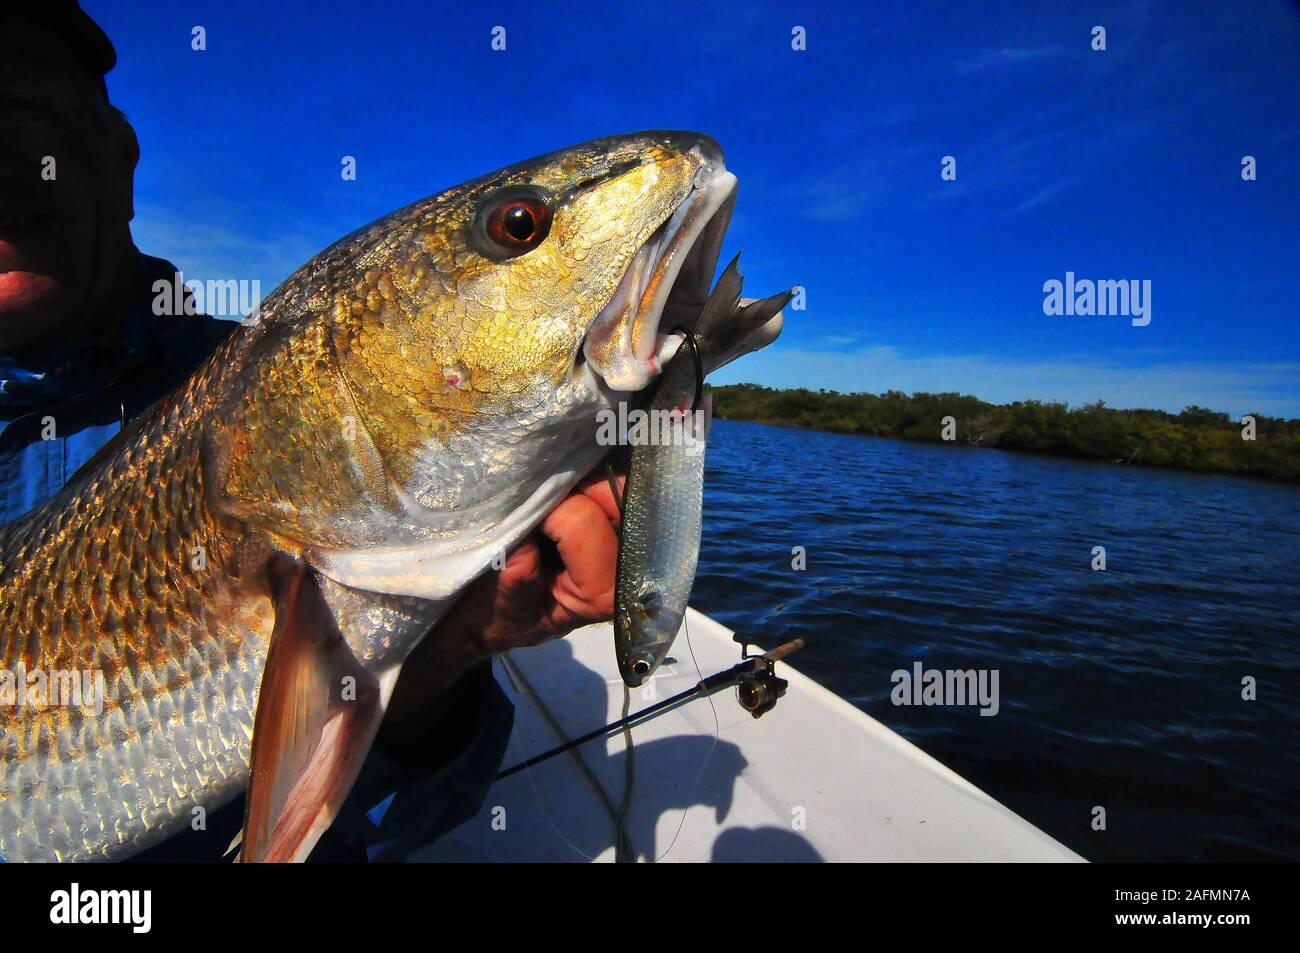 Florida's Volusia County offers some of the best redfish and trout fishing  in the world. The famous Indian River and Mosquito Lagoon action is great!  Stock Photo - Alamy